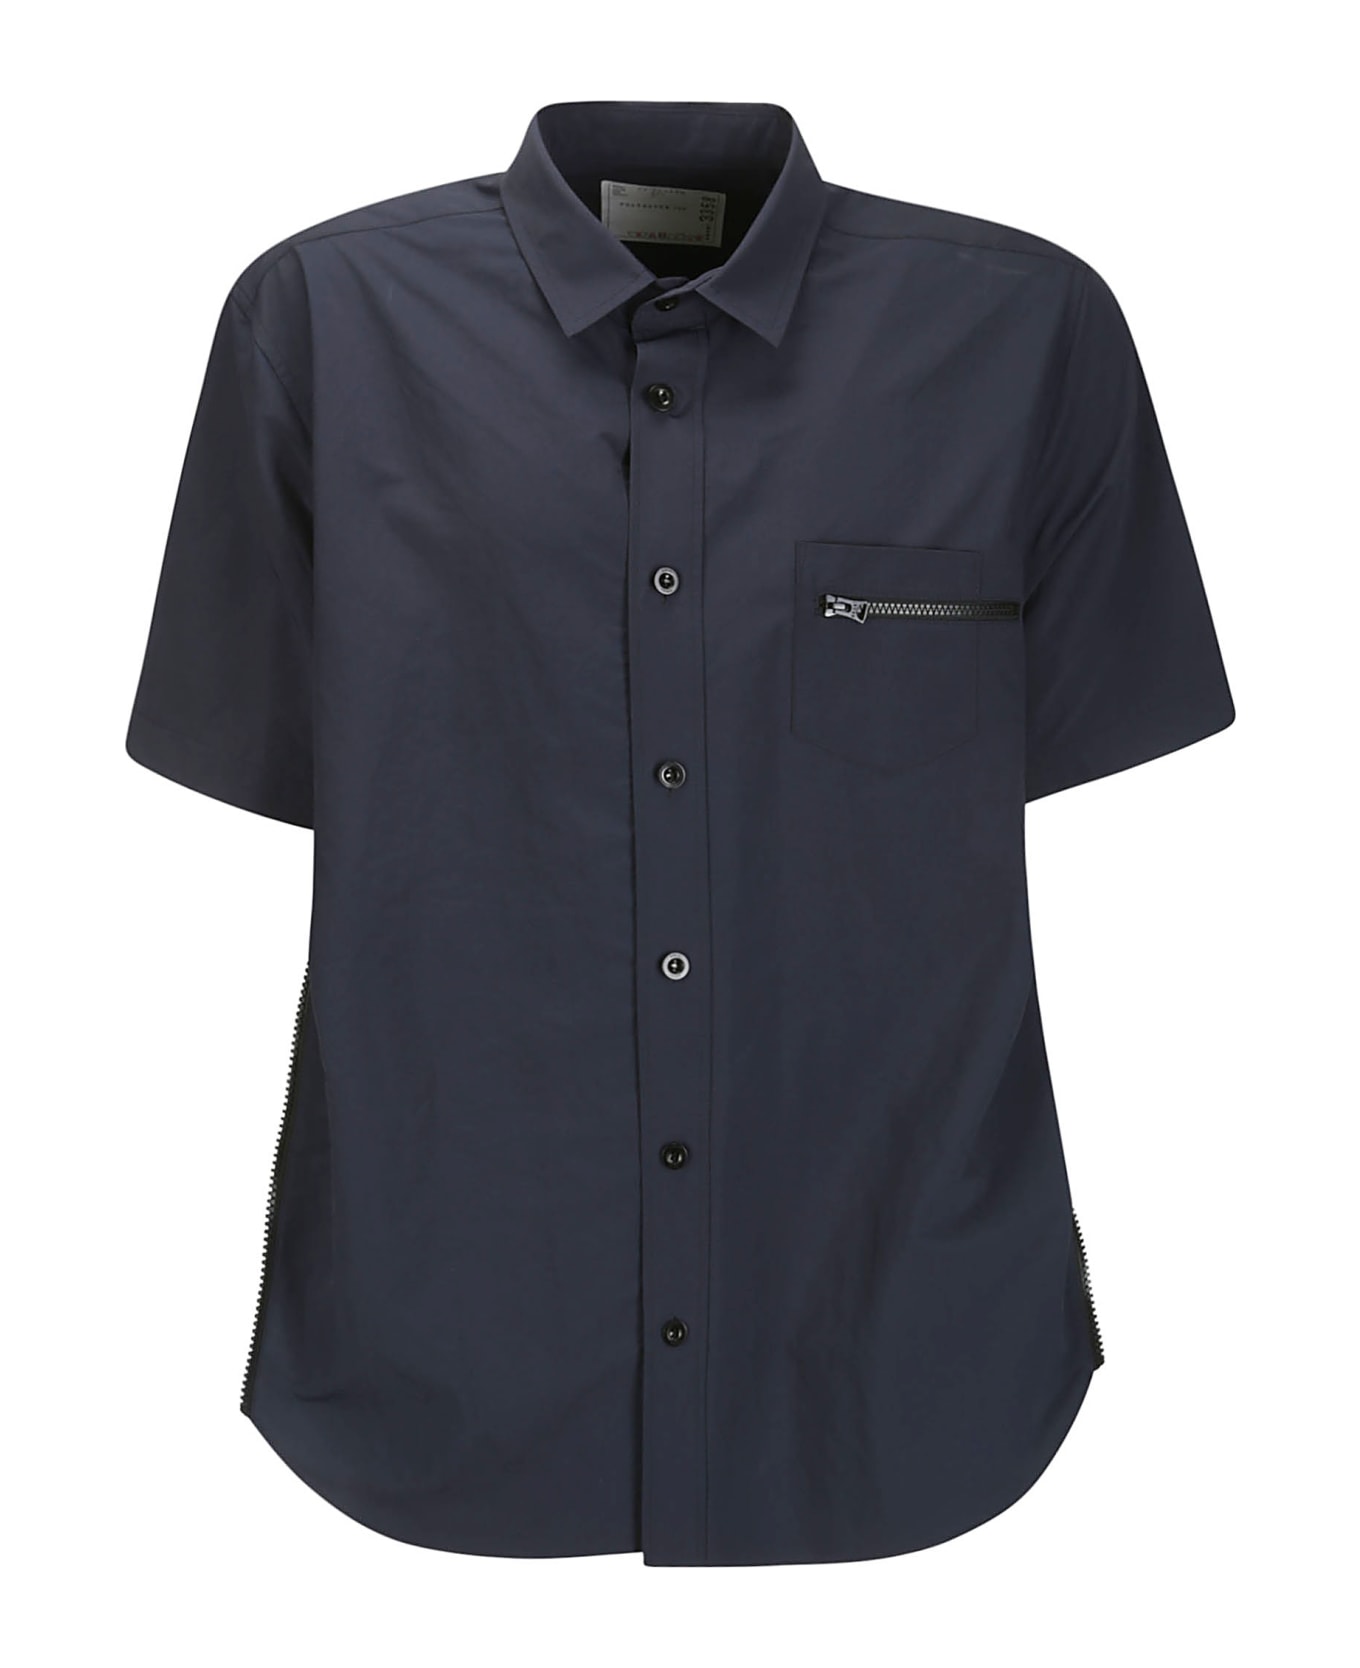 Magliano Pale Twisted Shirt - PALE BLUE  シャツ